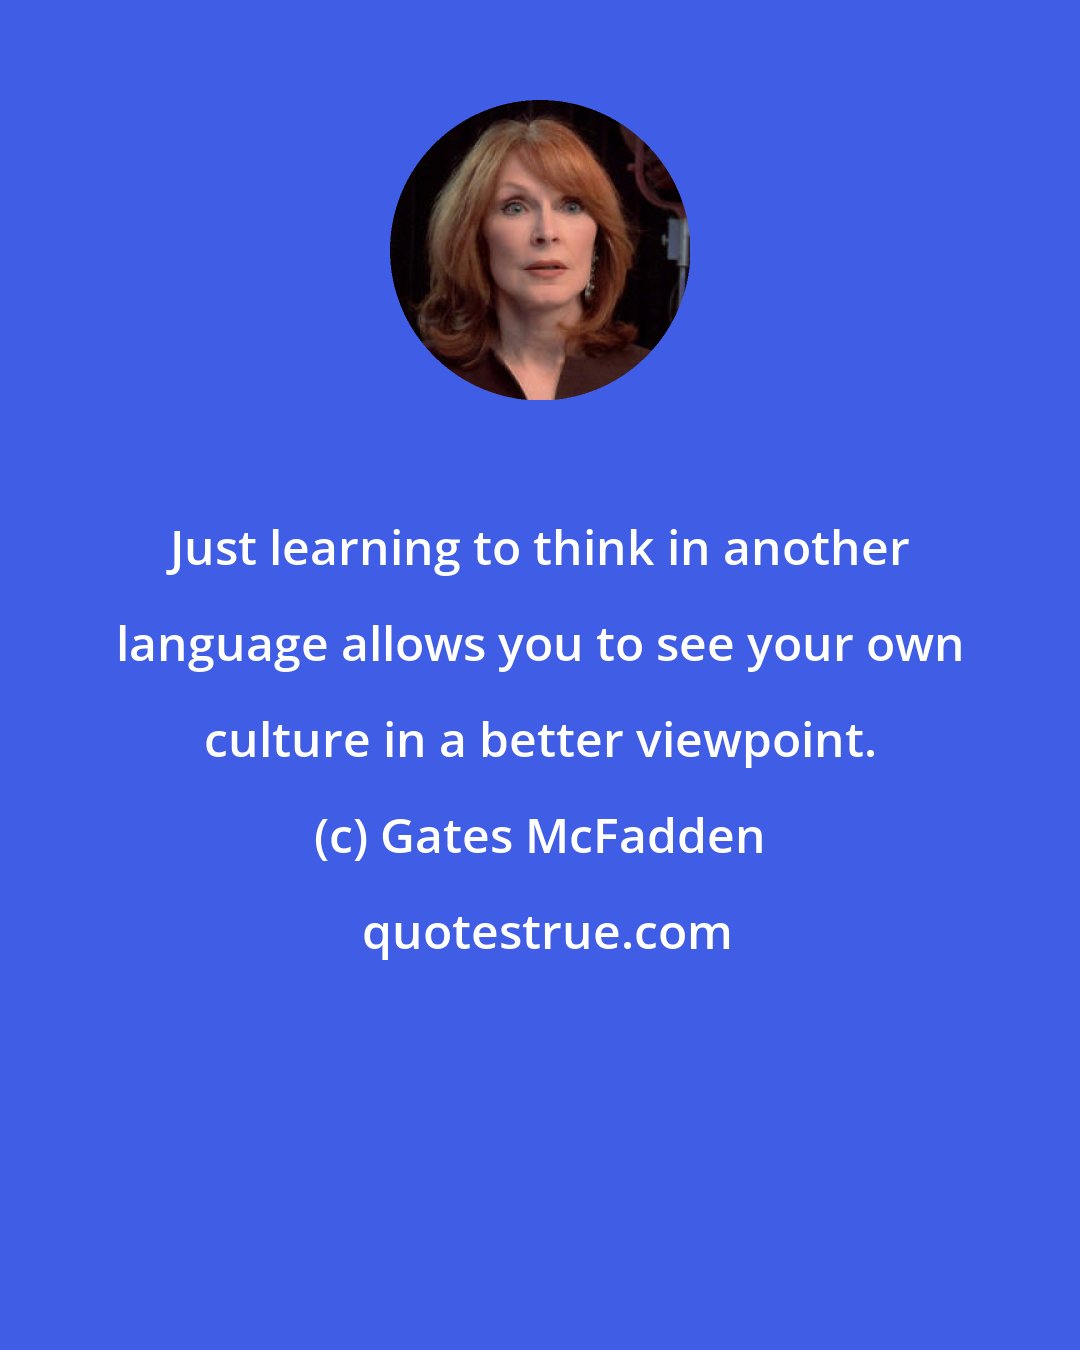 Gates McFadden: Just learning to think in another language allows you to see your own culture in a better viewpoint.